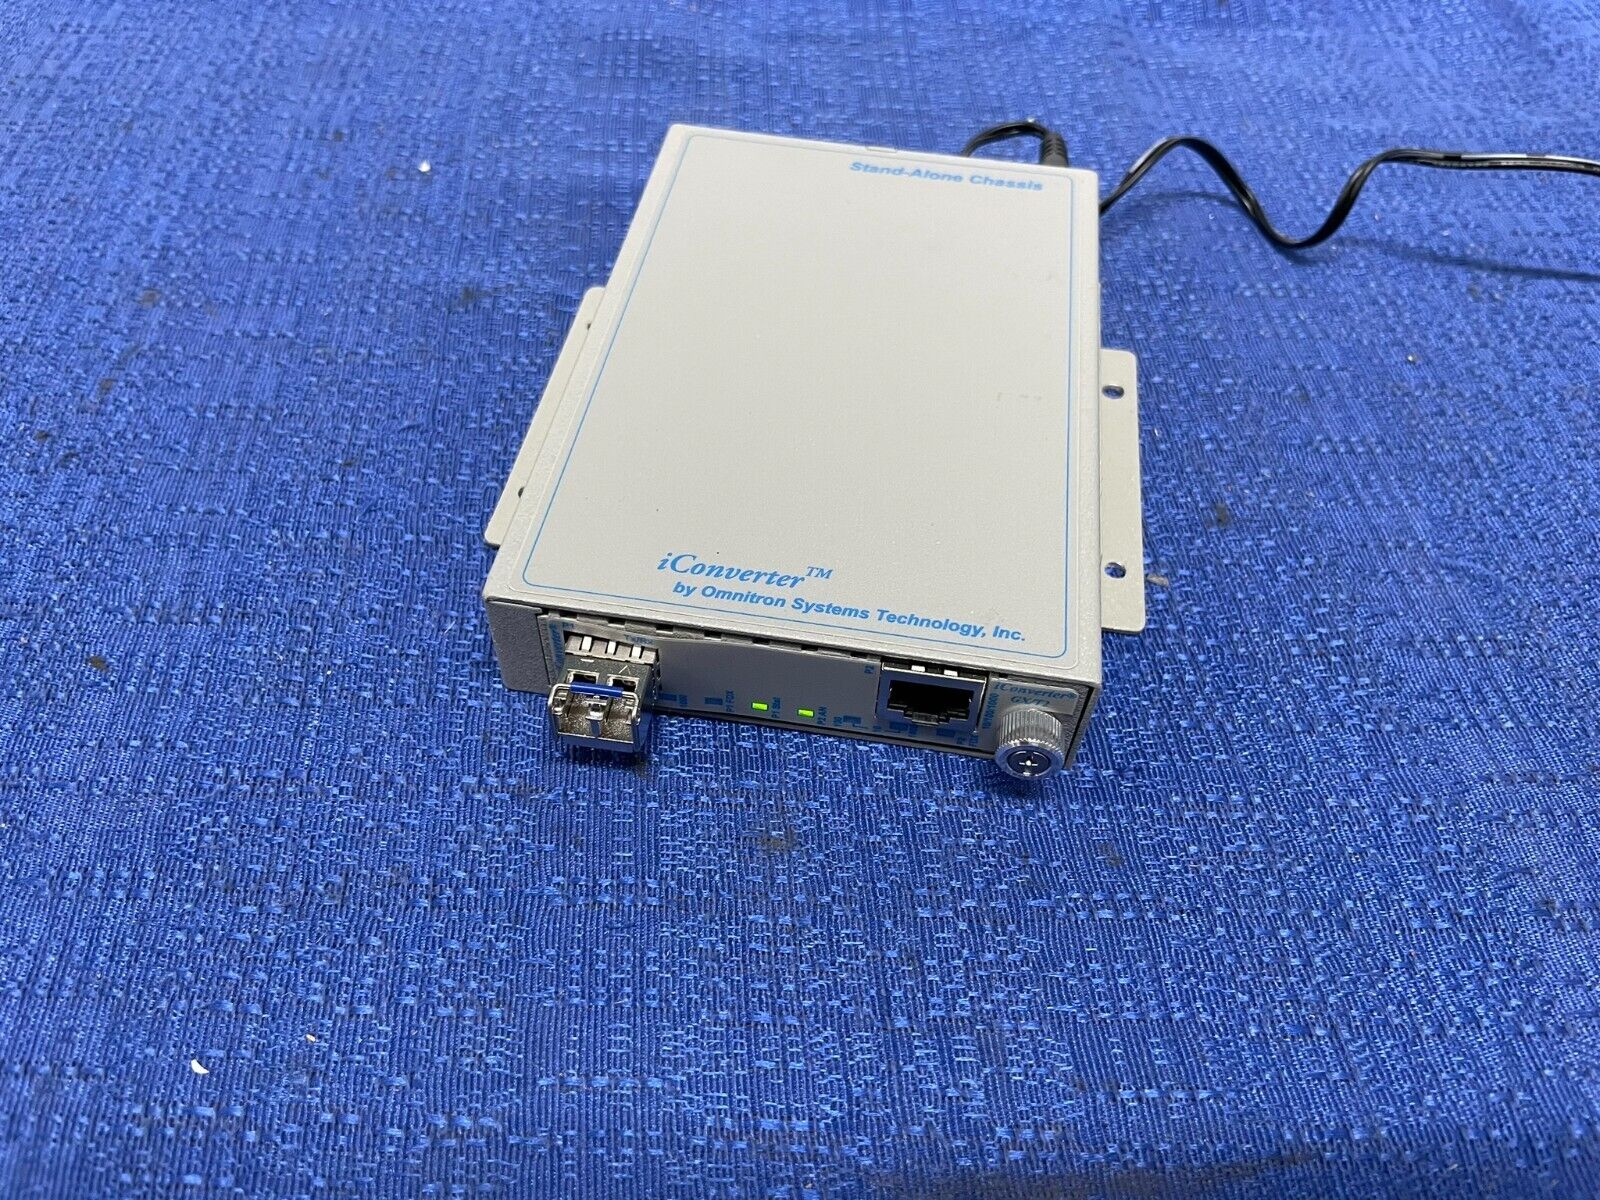 Omnitron Systems 8240 iConverter GX/T2 Converter Module USED WORKING